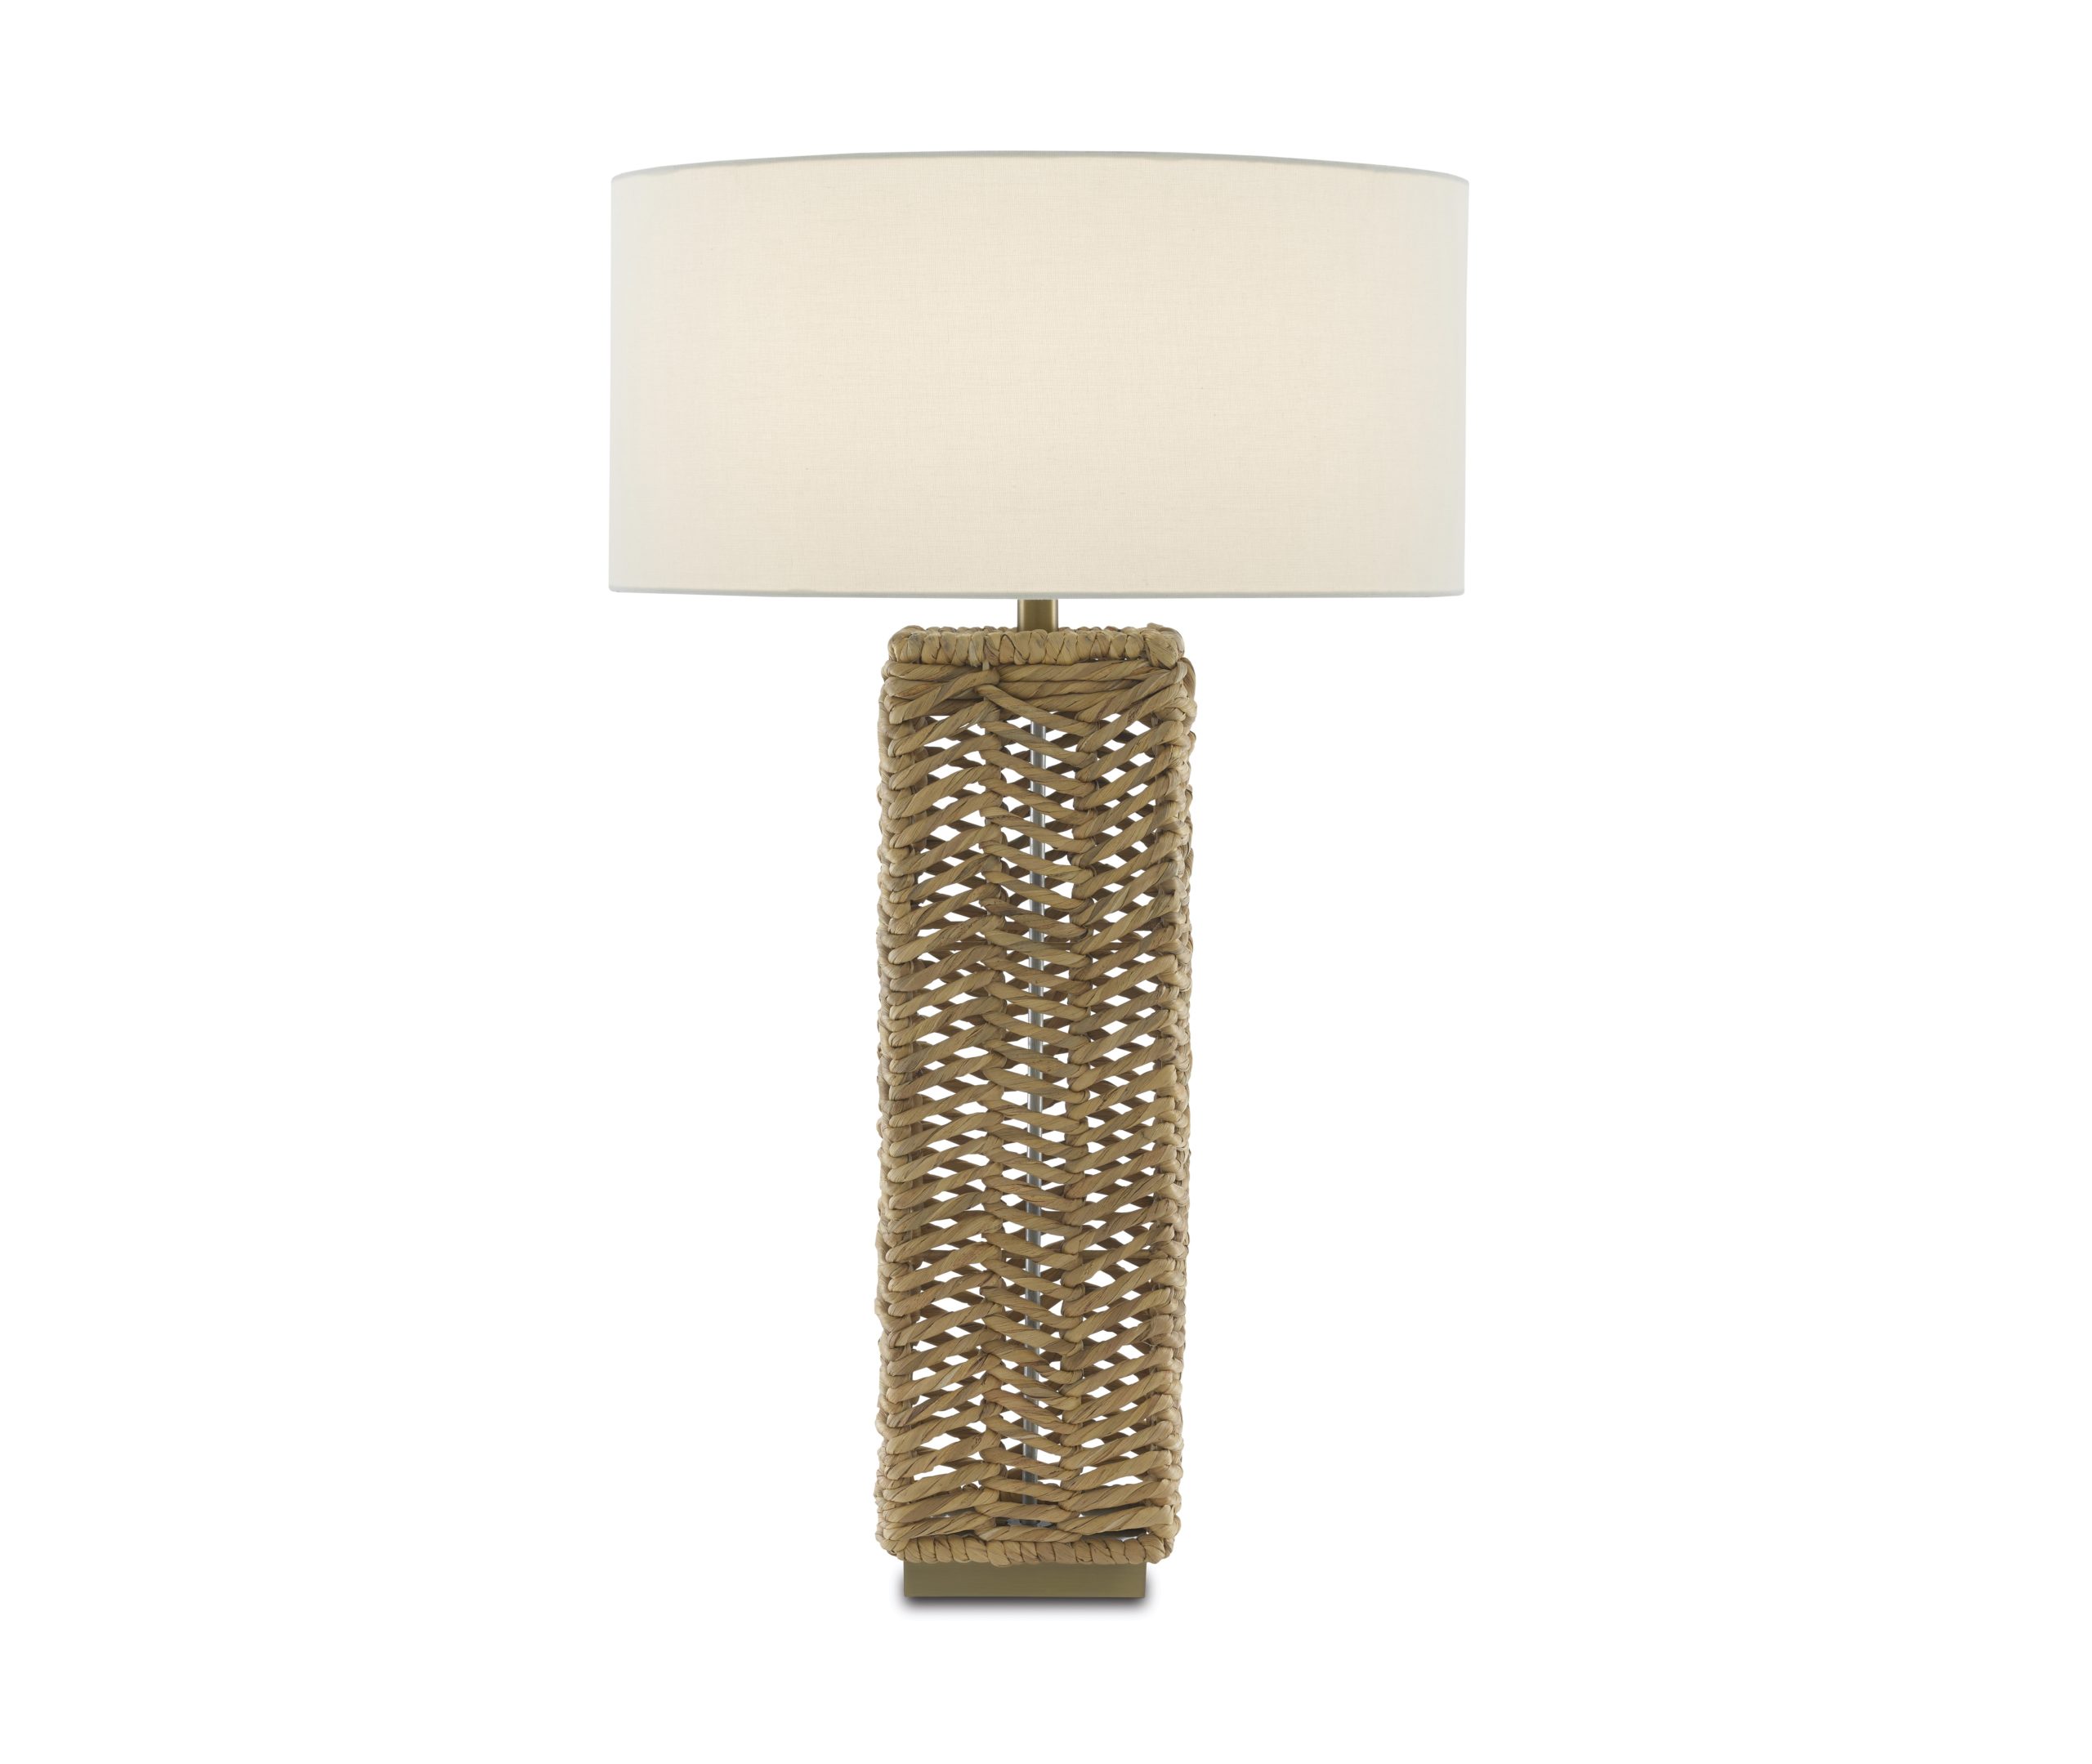 NYDC_WNWN_currey_and_co_products_torquay_table_lamp_6000-0680_